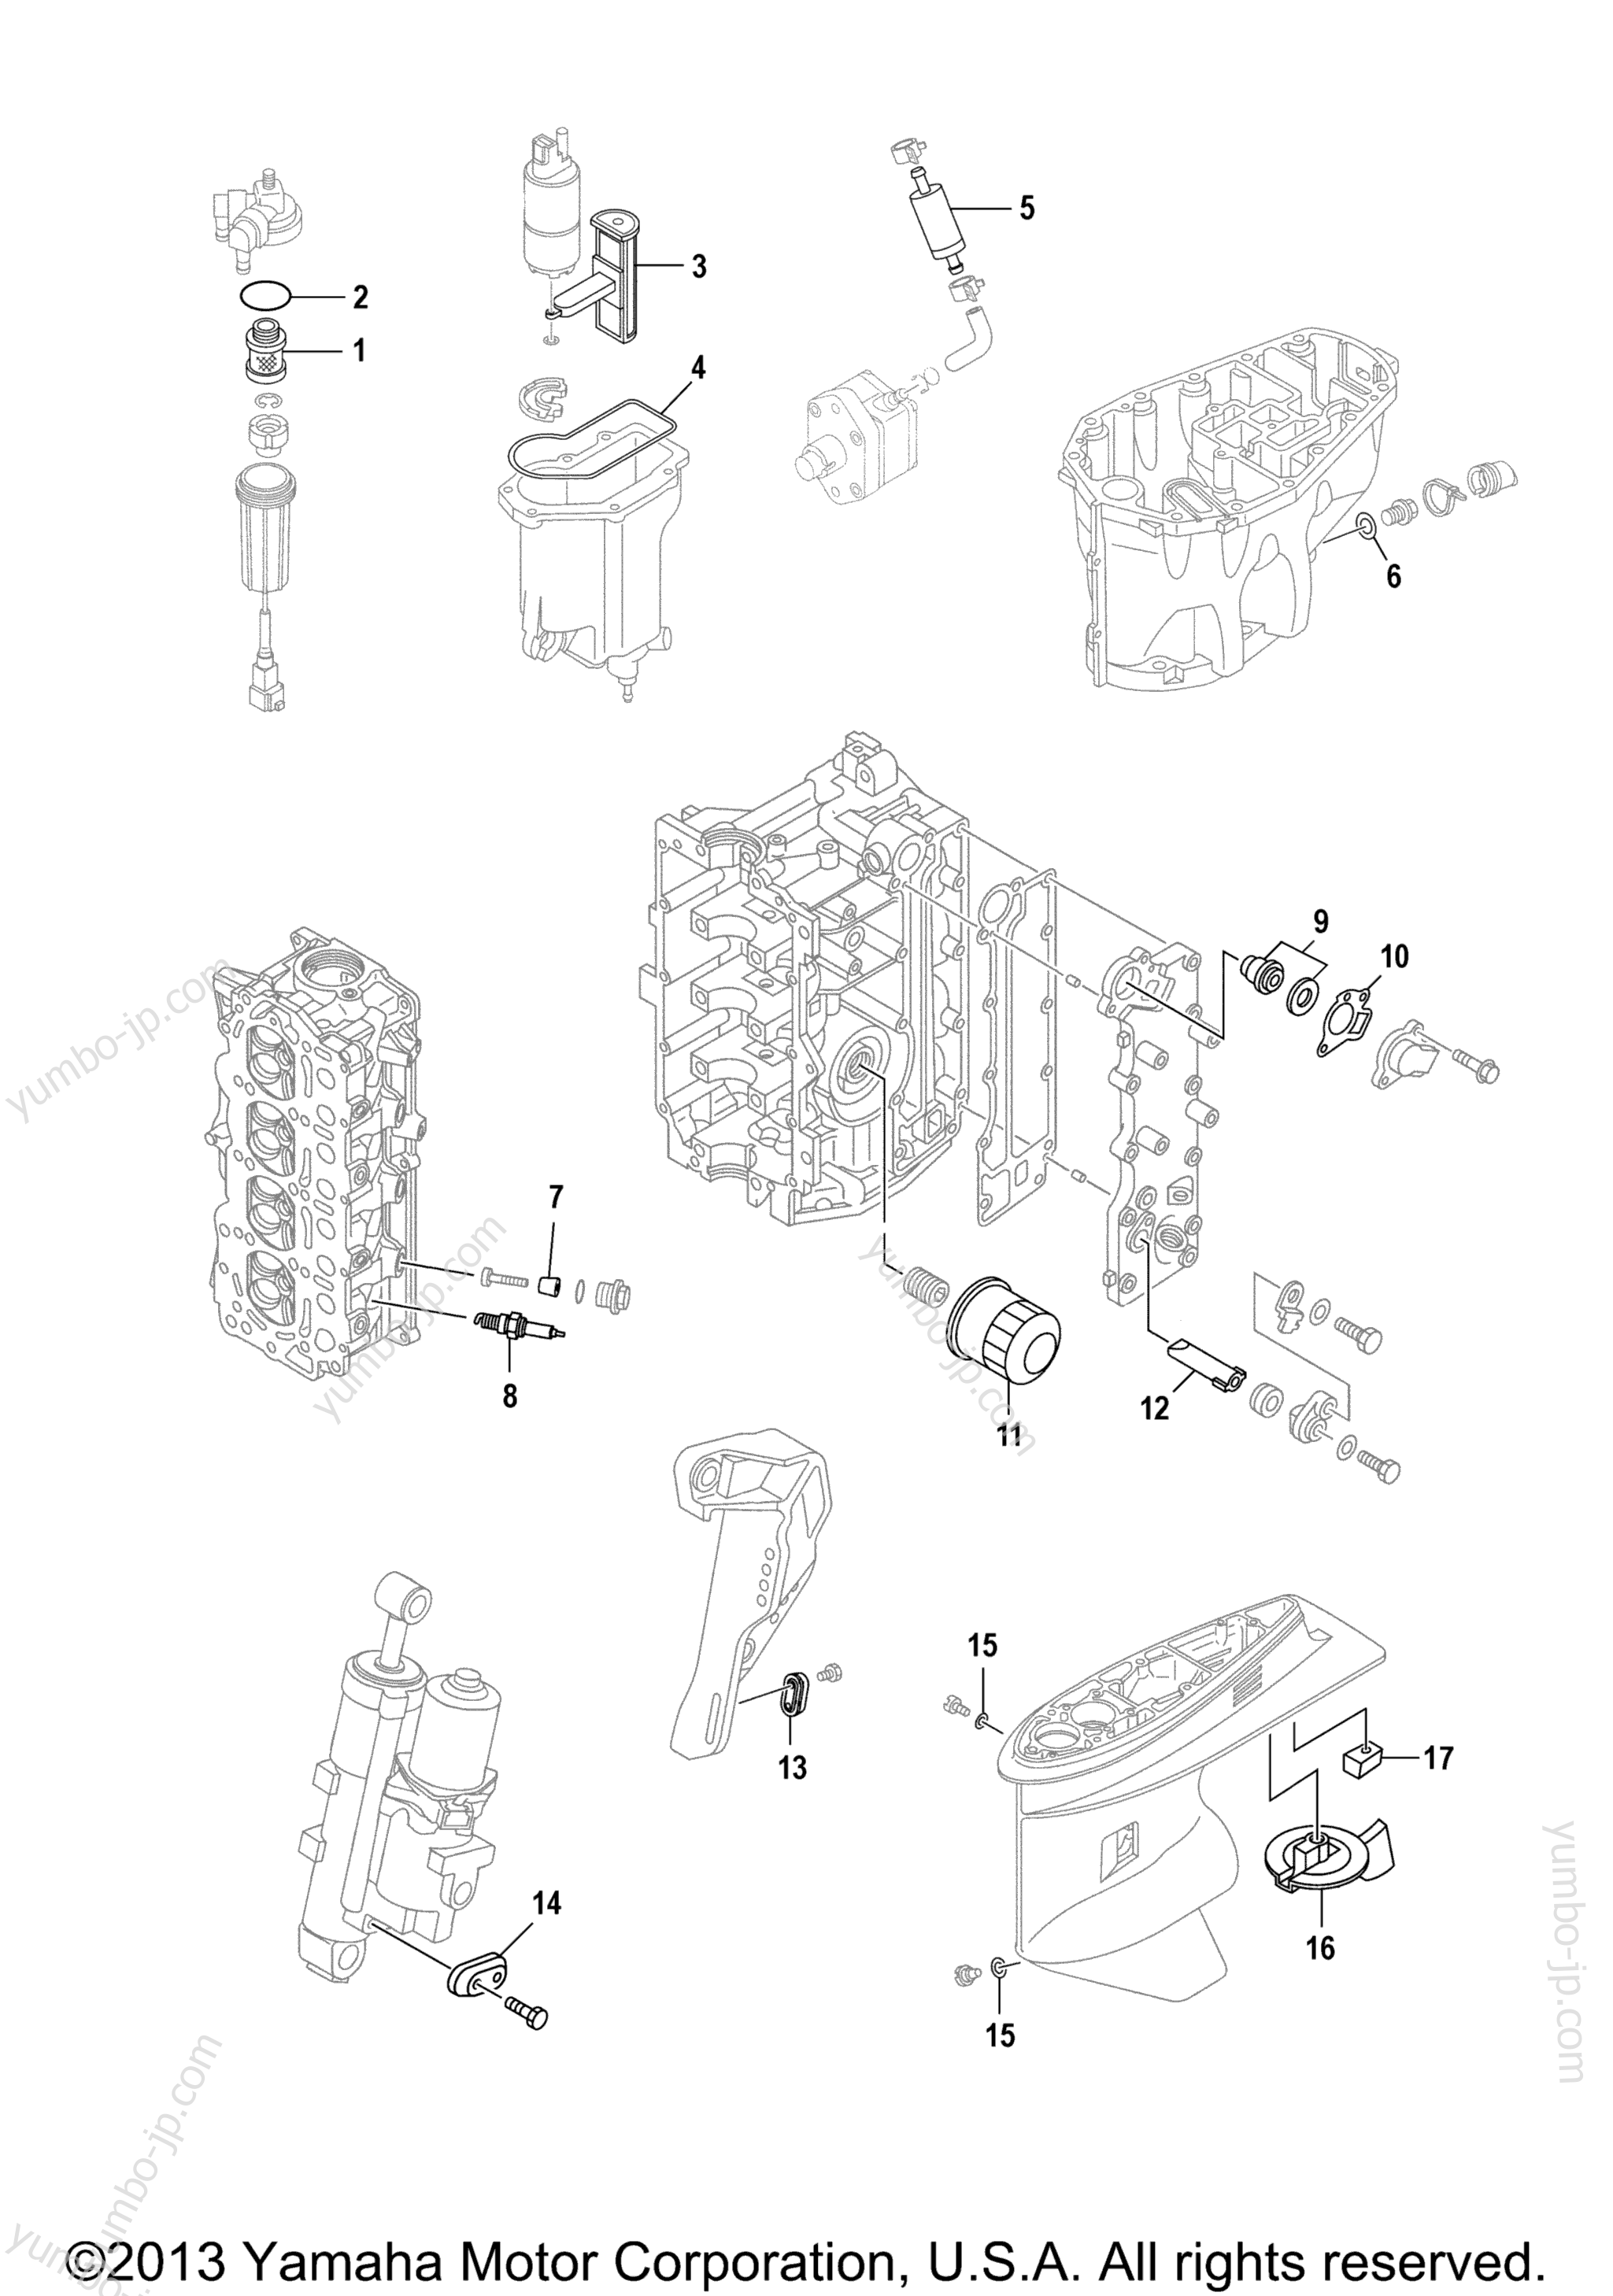 Scheduled Service Parts for outboards YAMAHA F50LA_0112 (0112) 2006 year